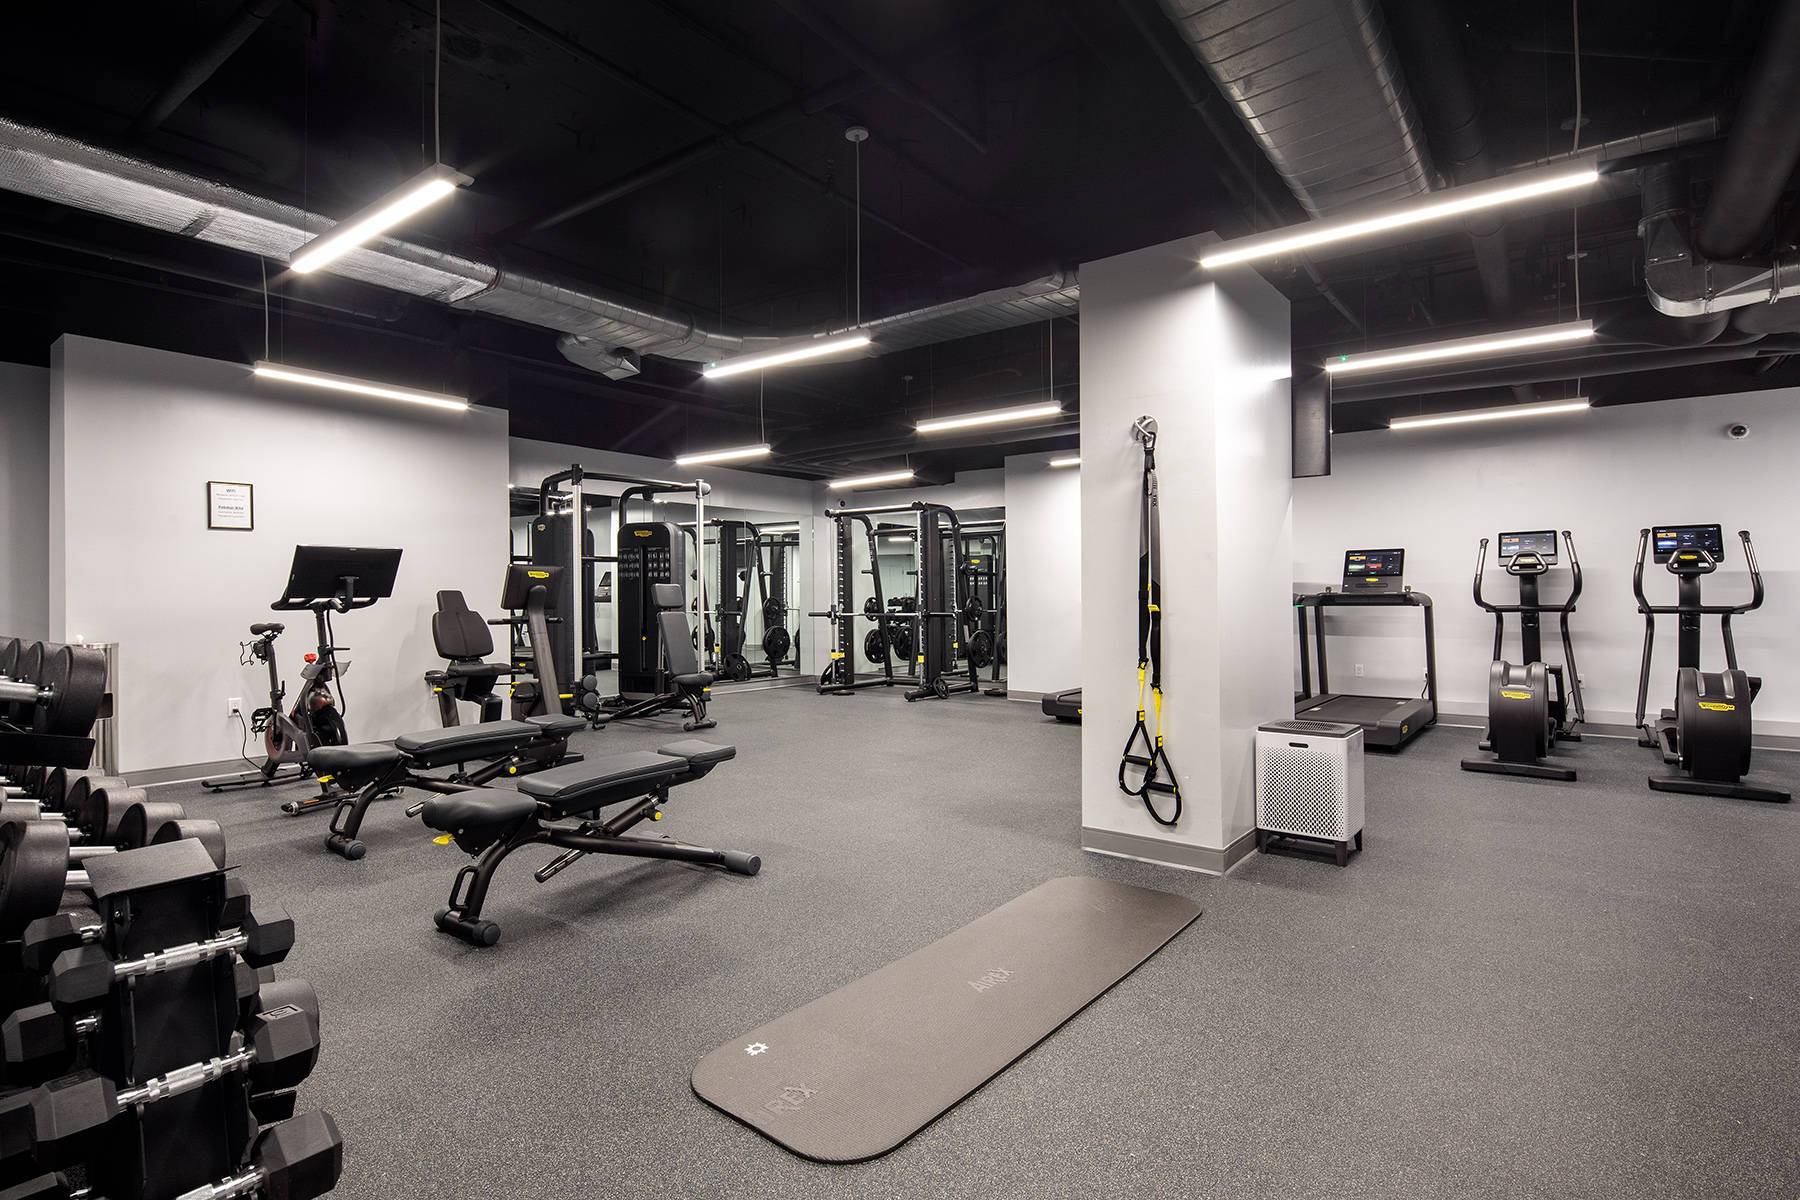 Large fitness center with various weights, fitness machines, bikes, resistance bands station and more